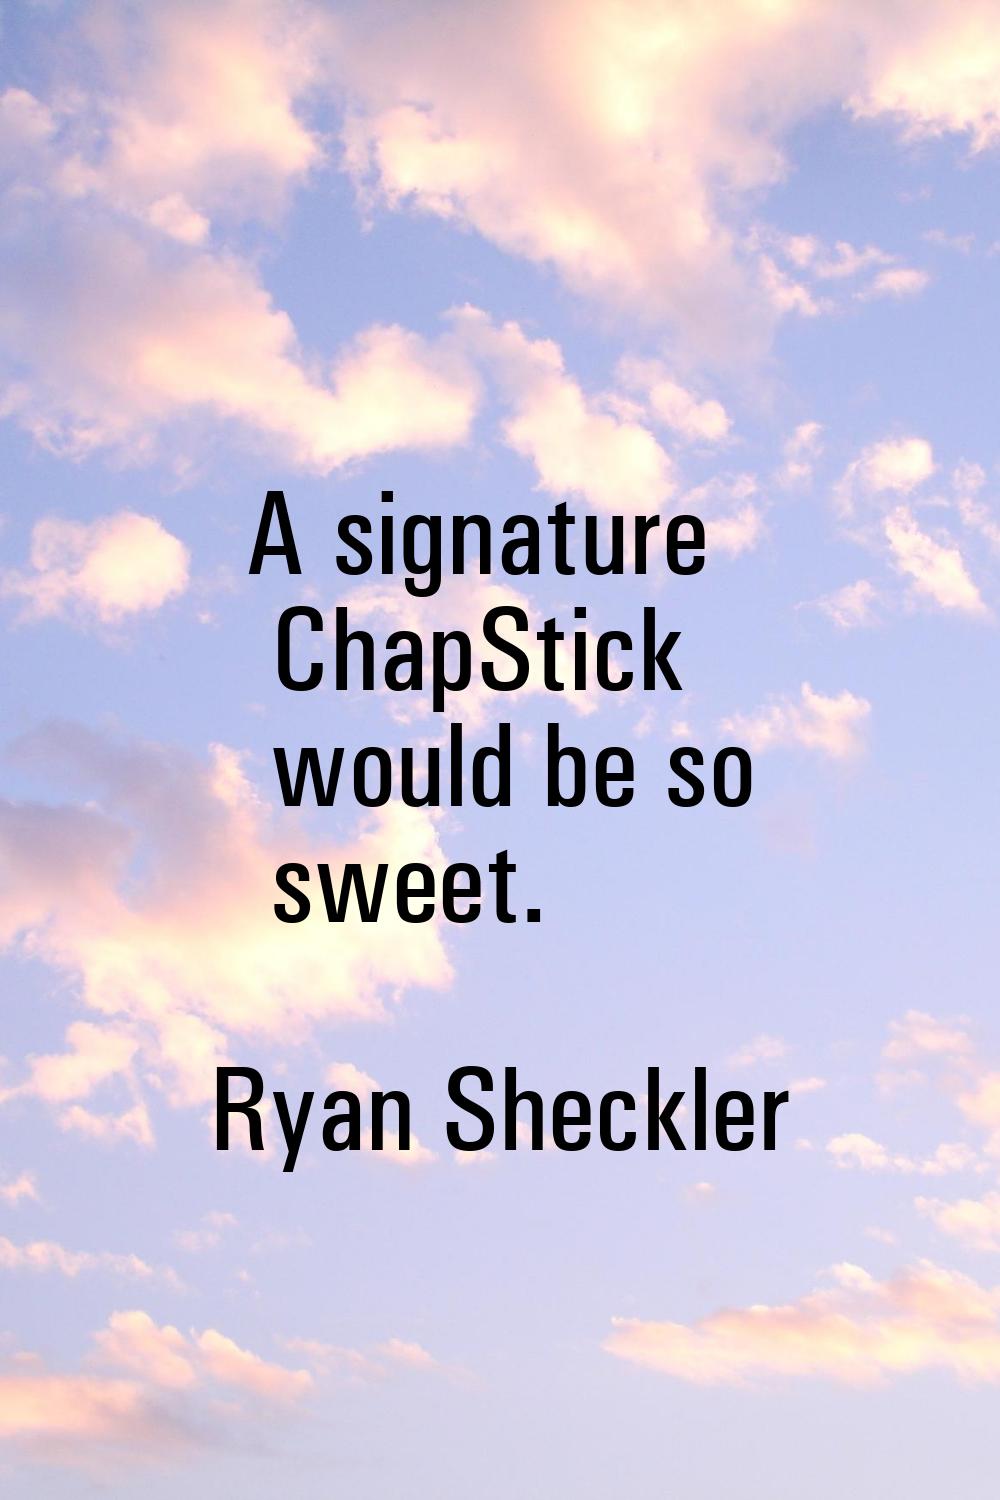 A signature ChapStick would be so sweet.